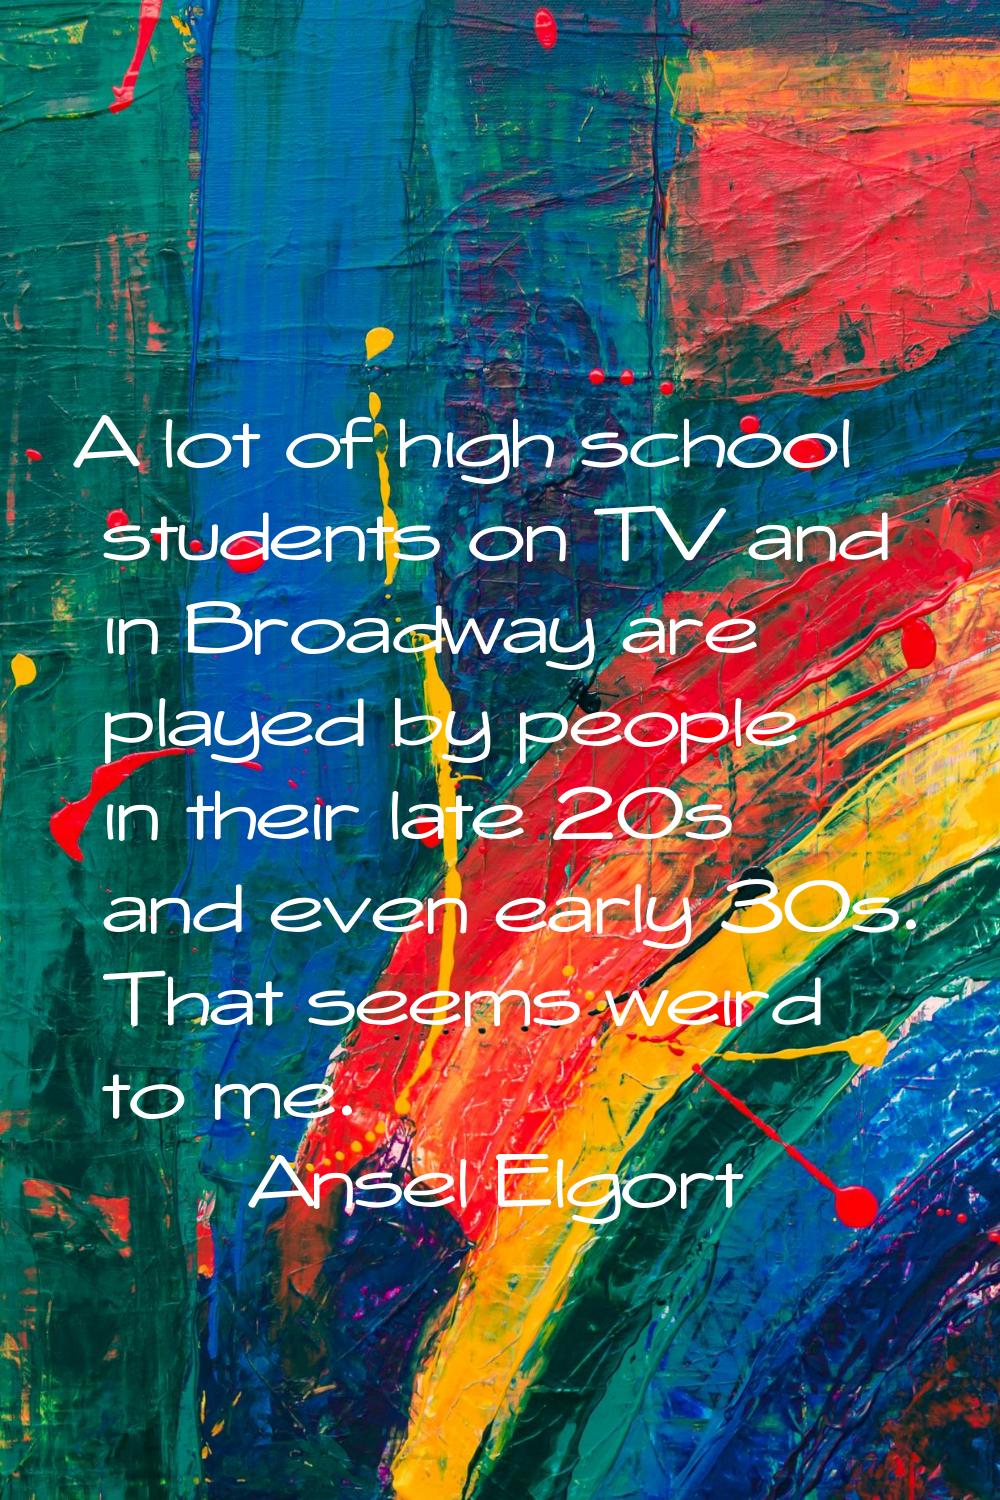 A lot of high school students on TV and in Broadway are played by people in their late 20s and even